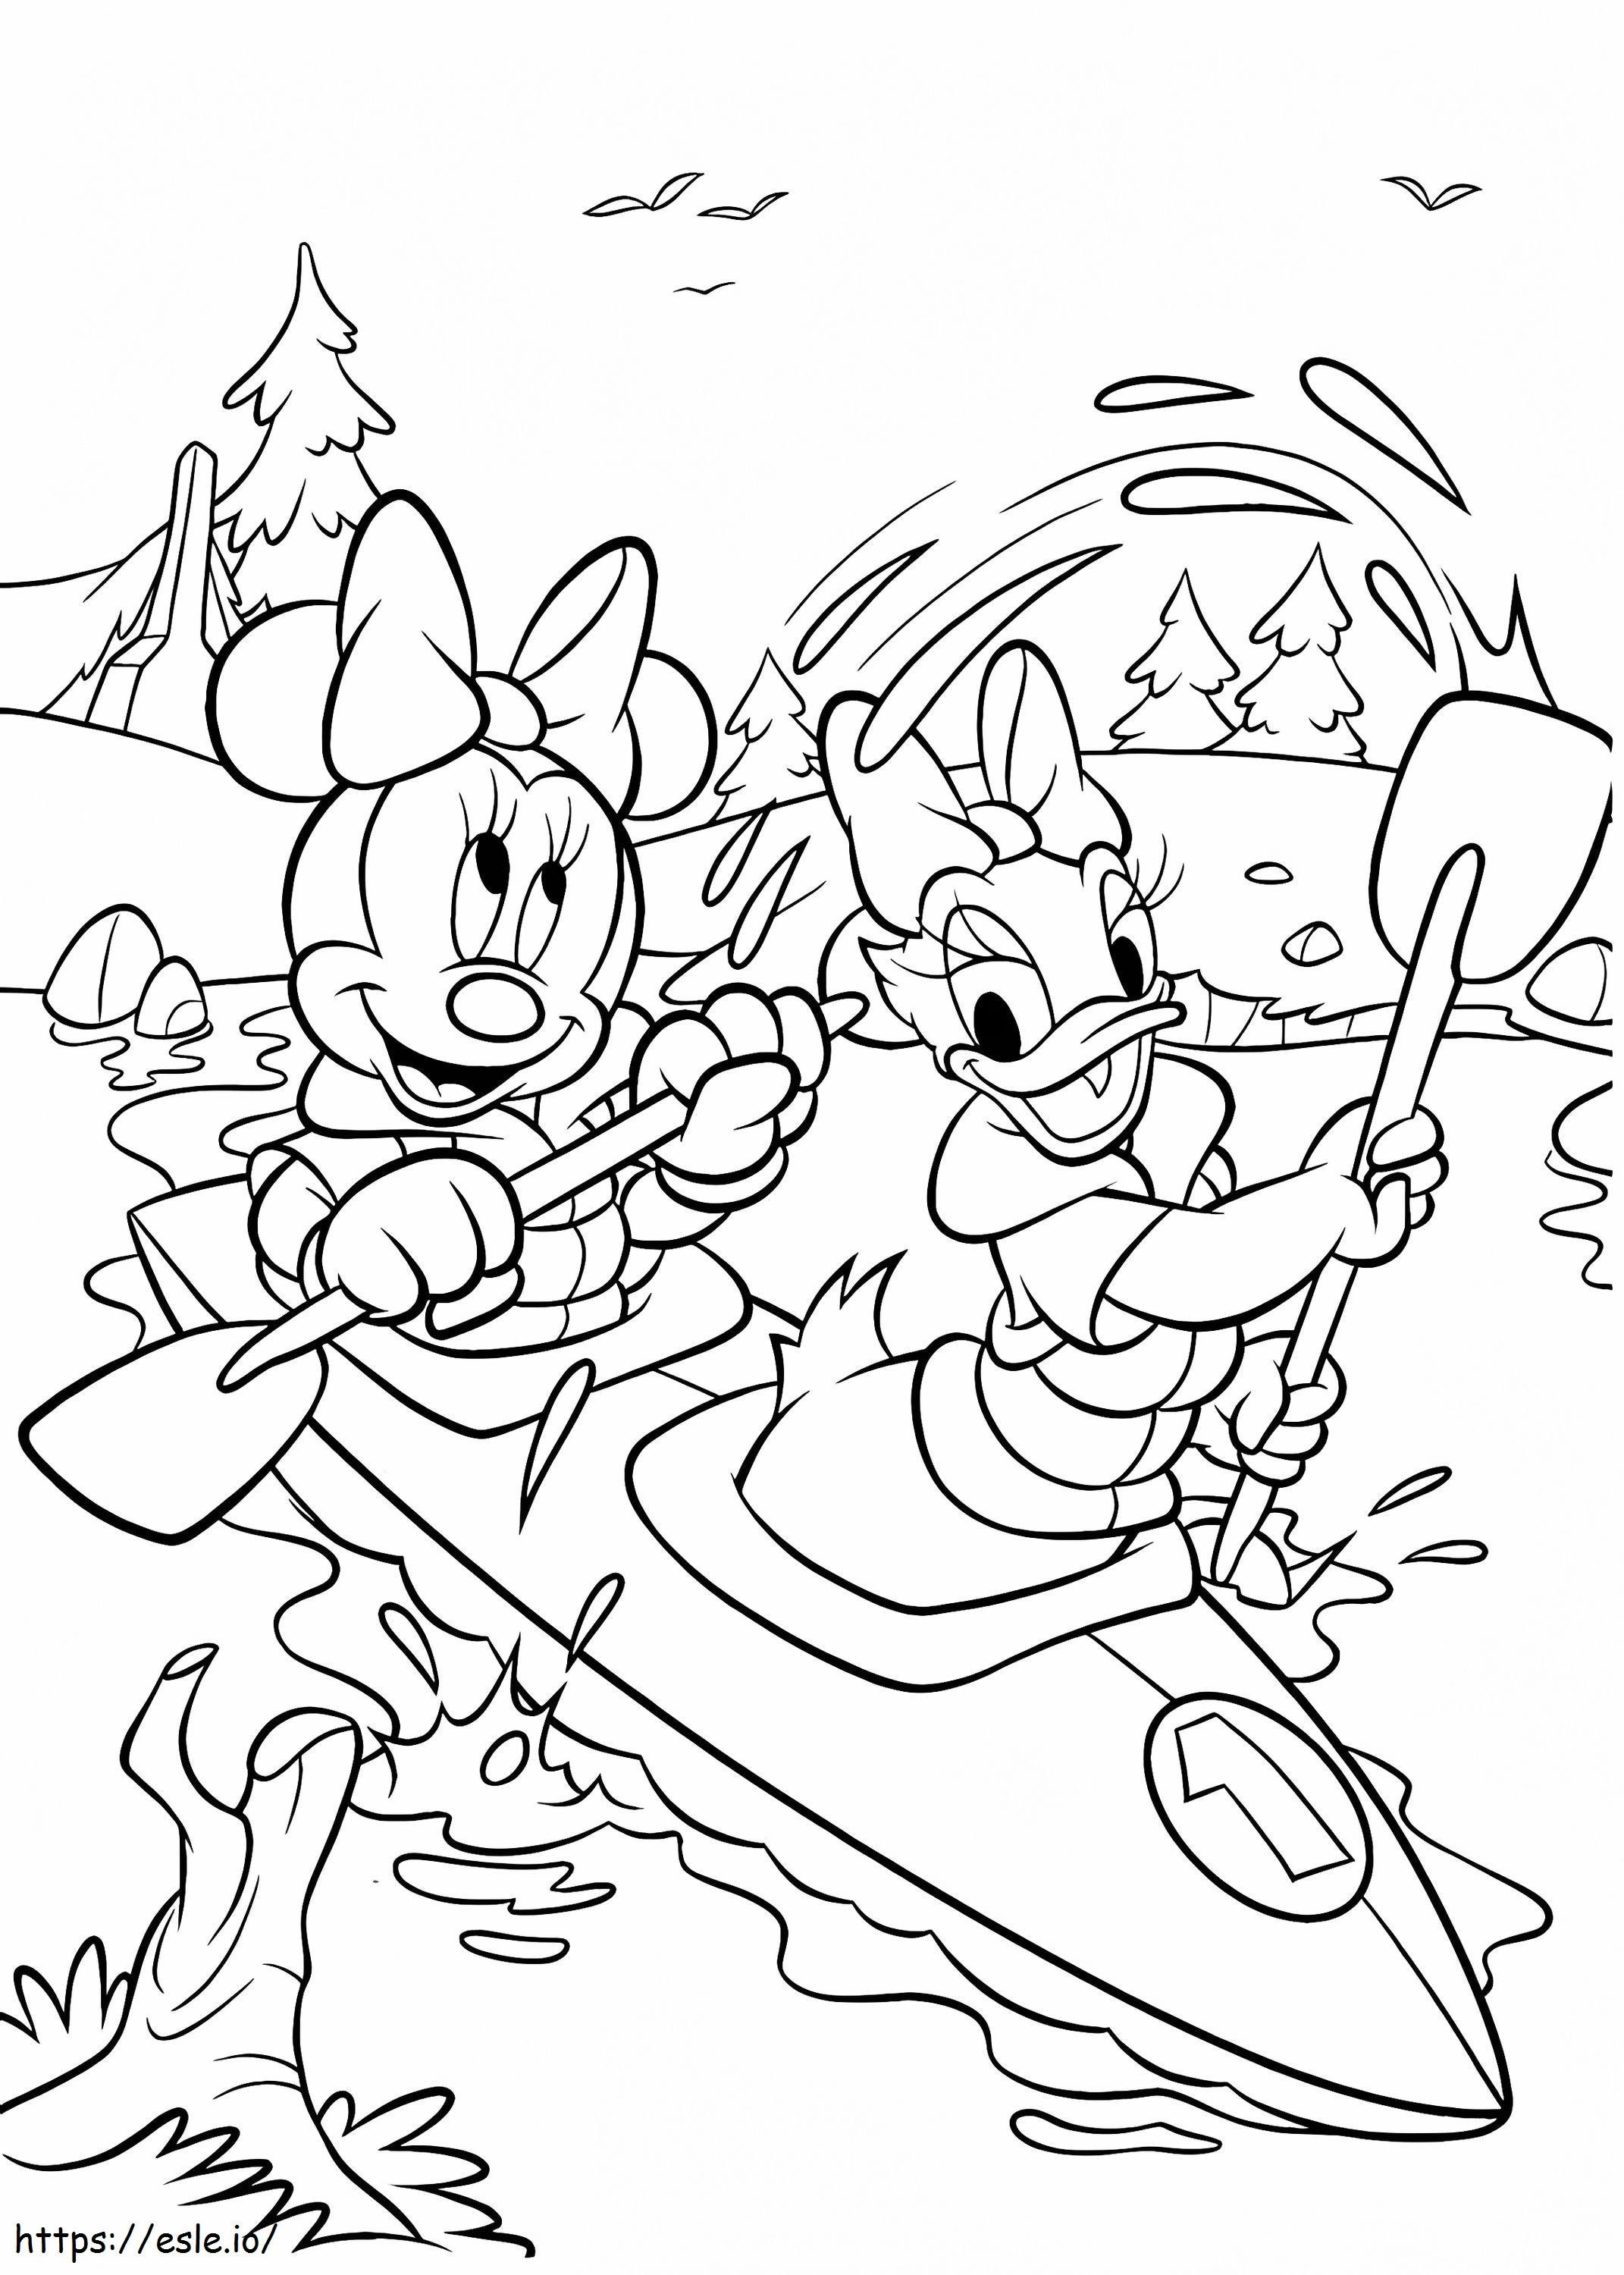 1534561276 Minnie And Daisy Rowing A4 coloring page